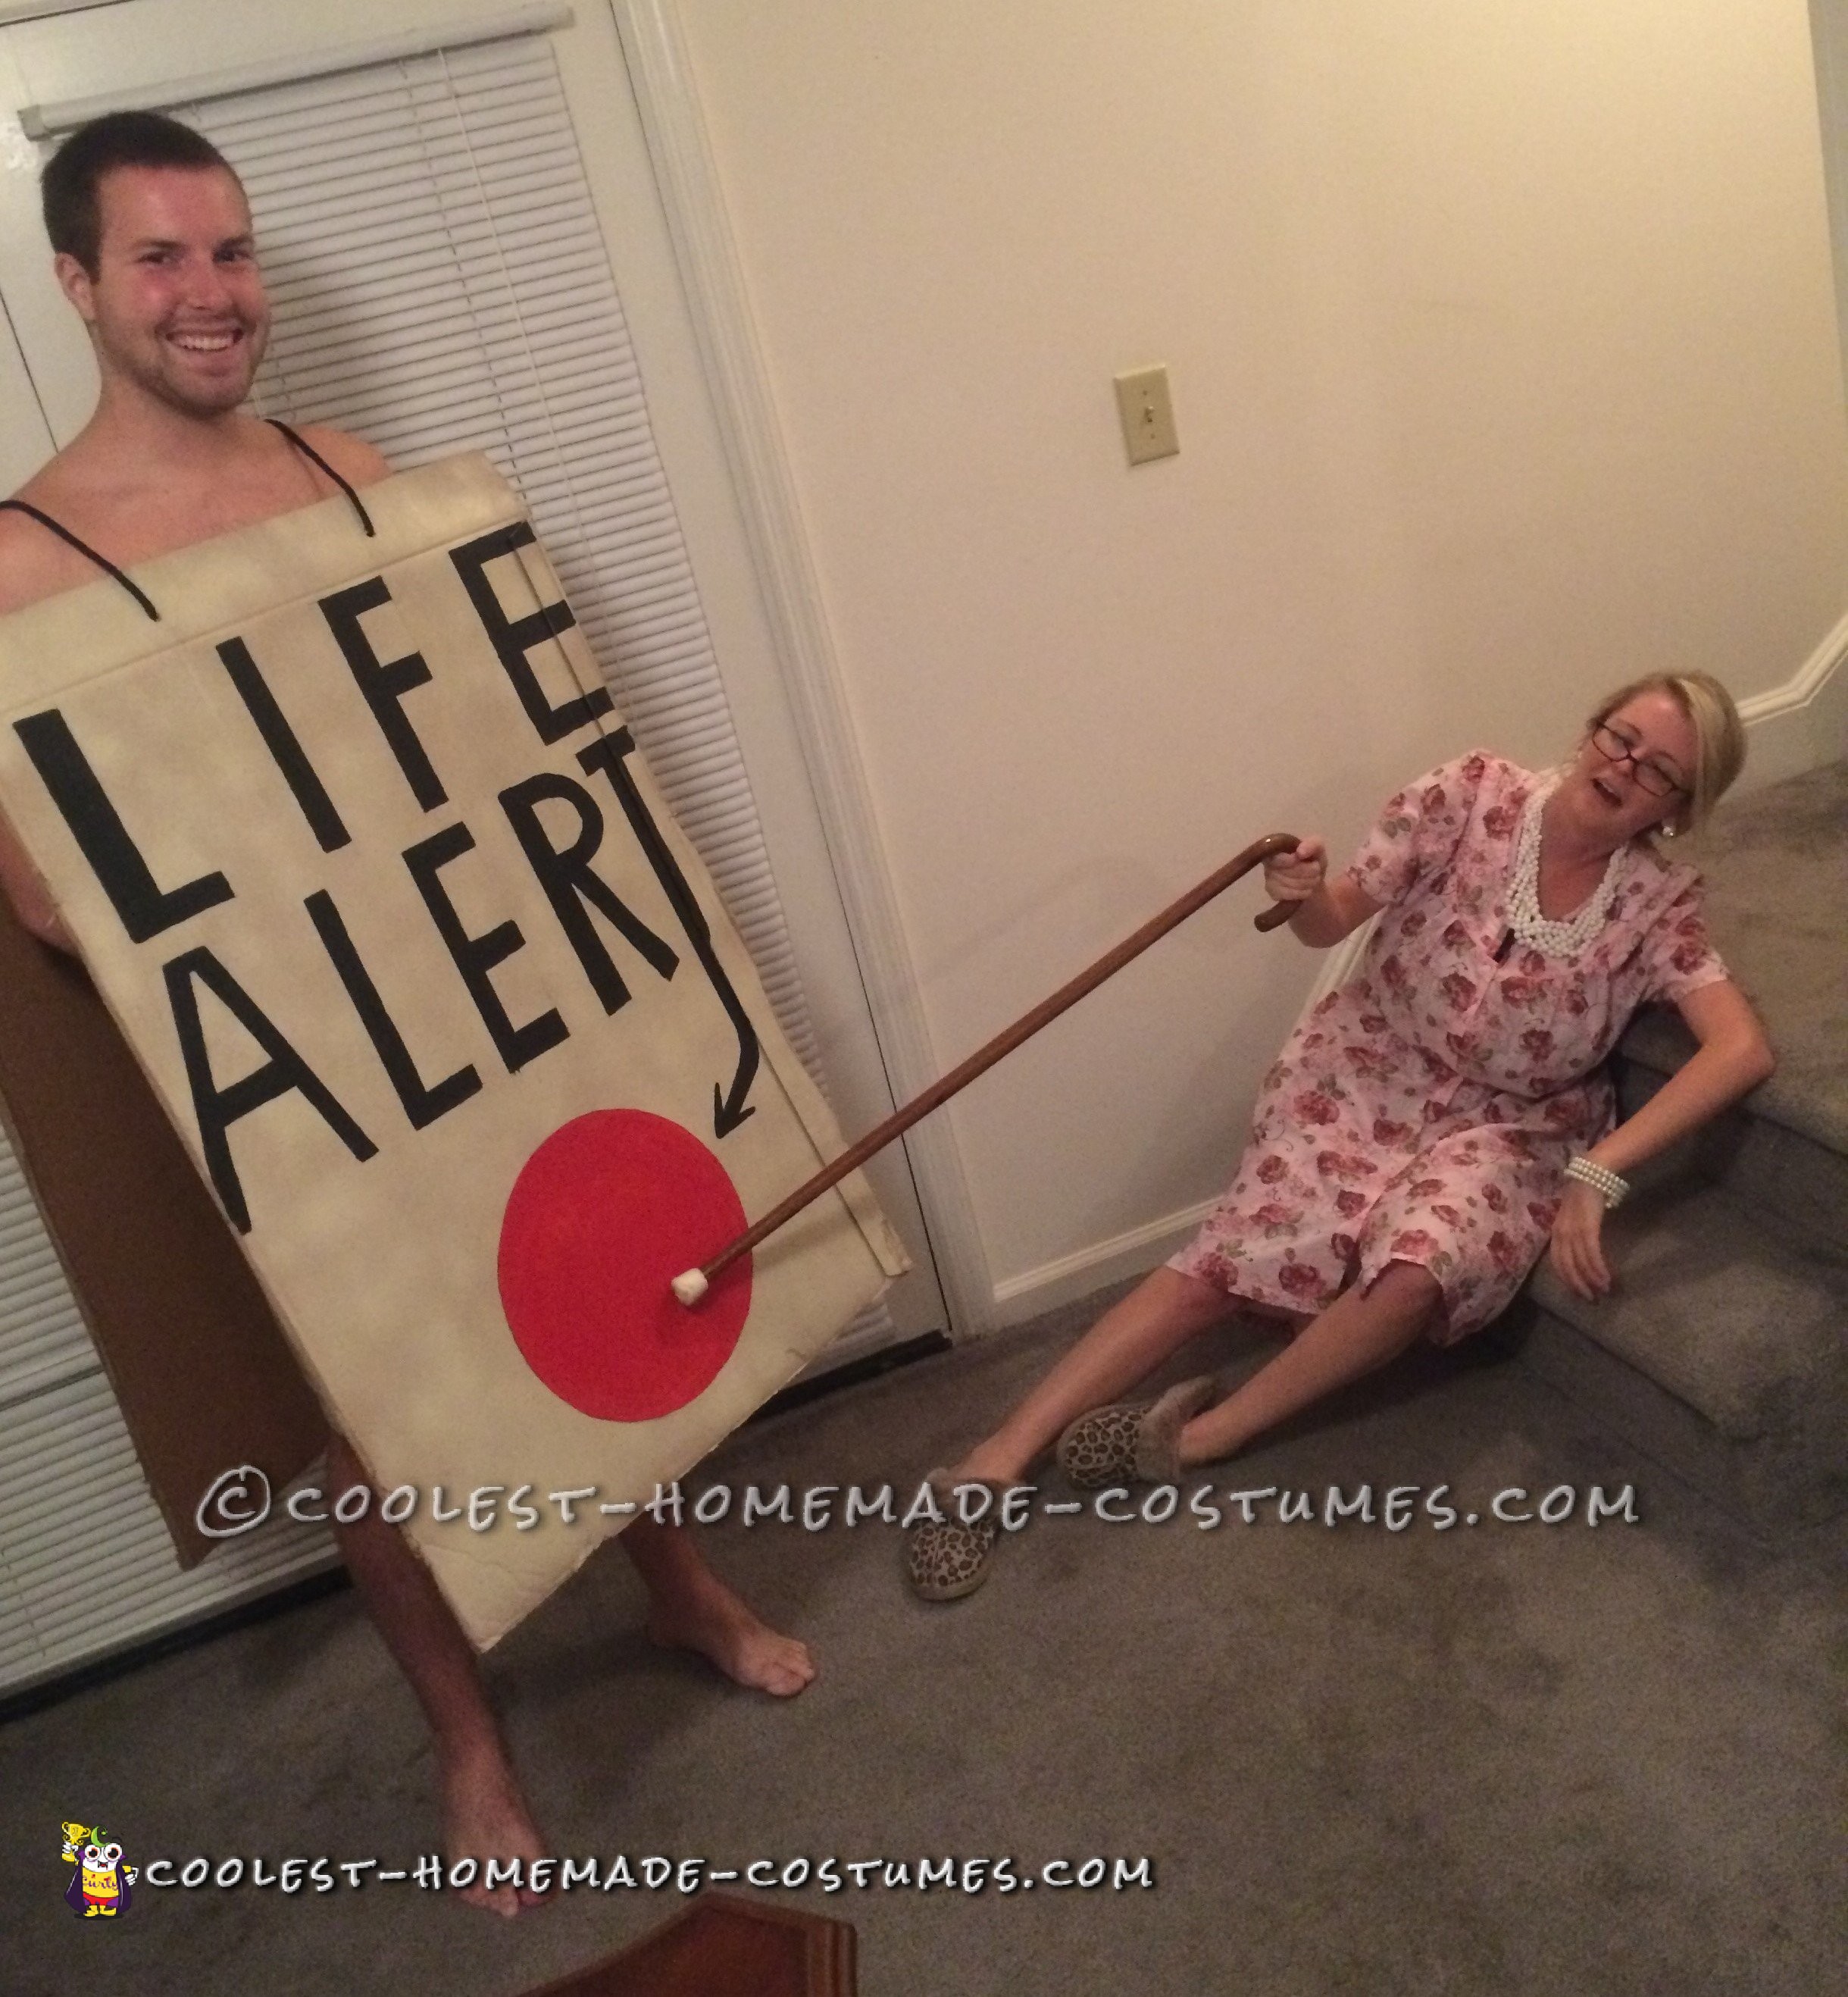 Awesome Old Lady and Life Alert Button Funny Couple Costume